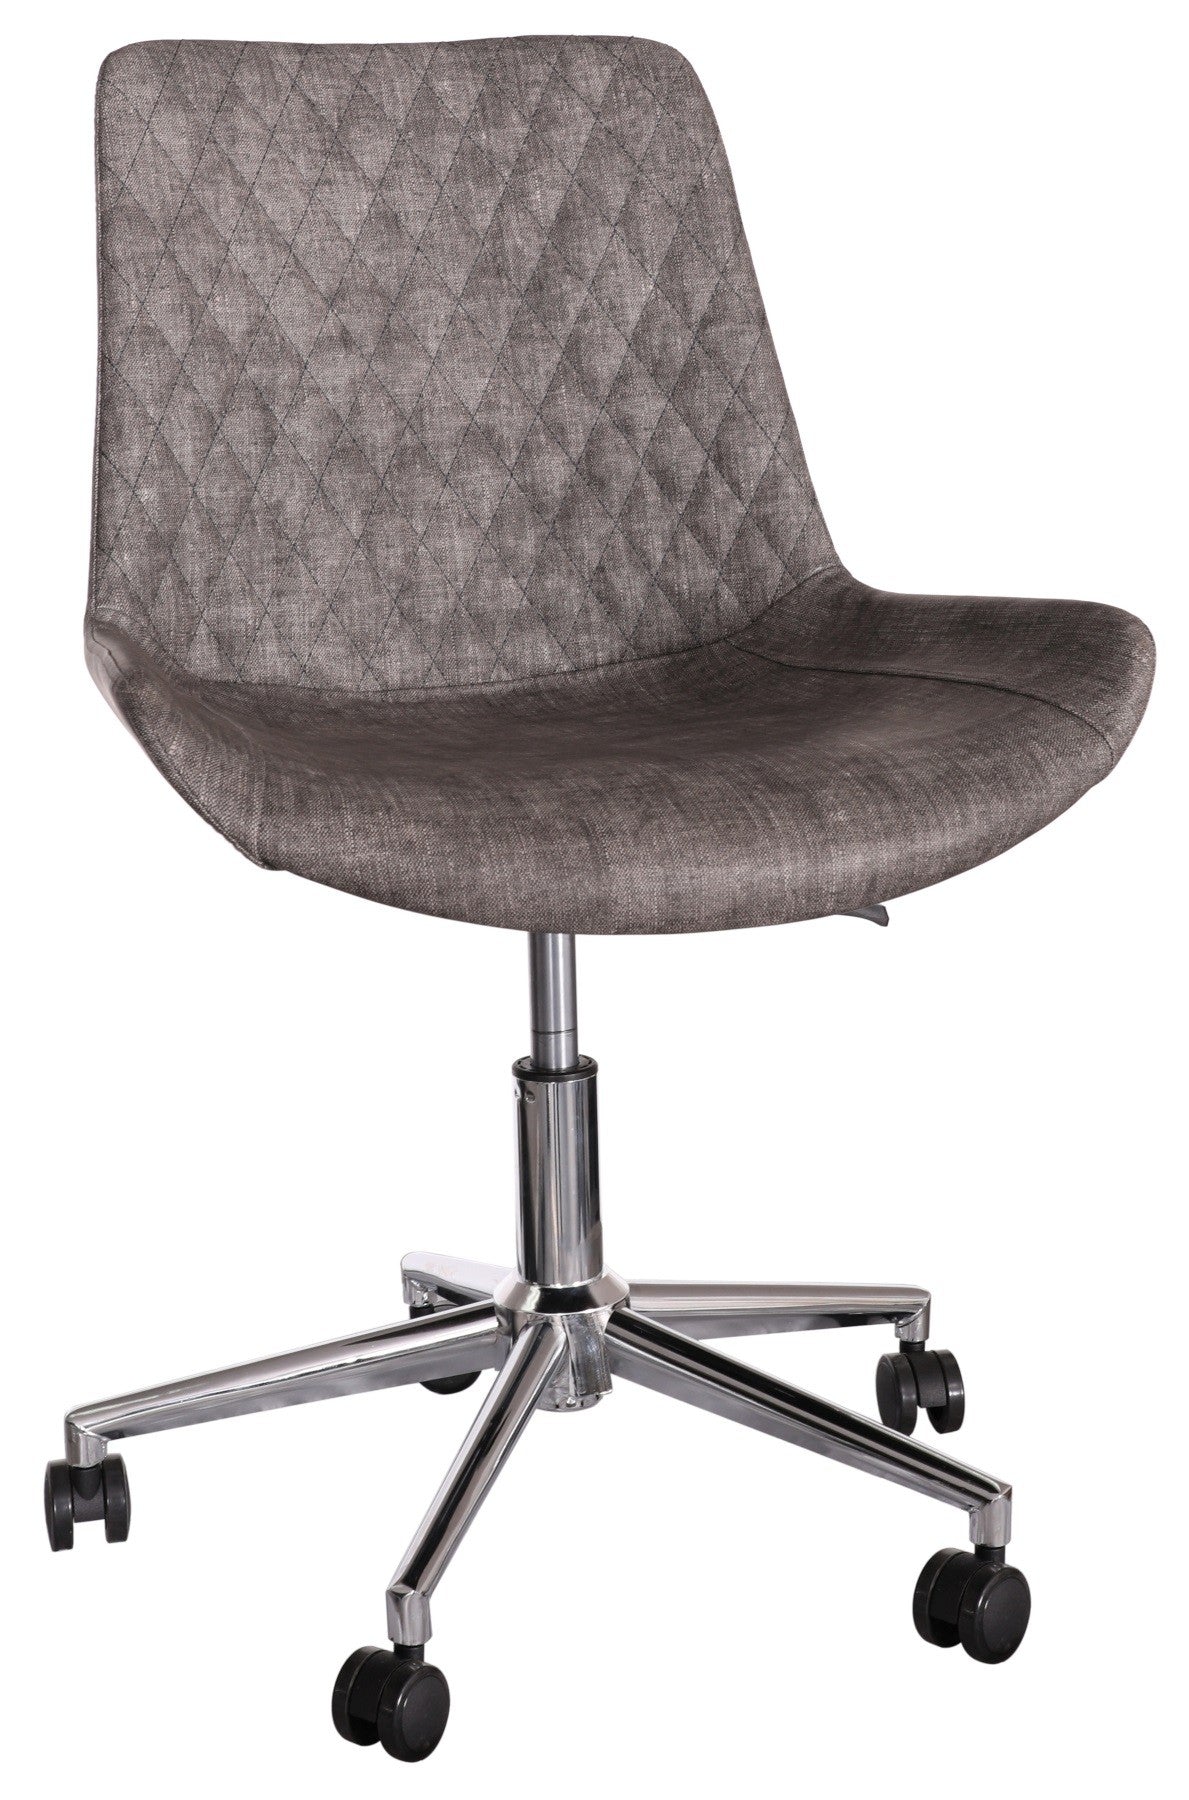 Classic Fusion Swivel Adjustable Office Chair